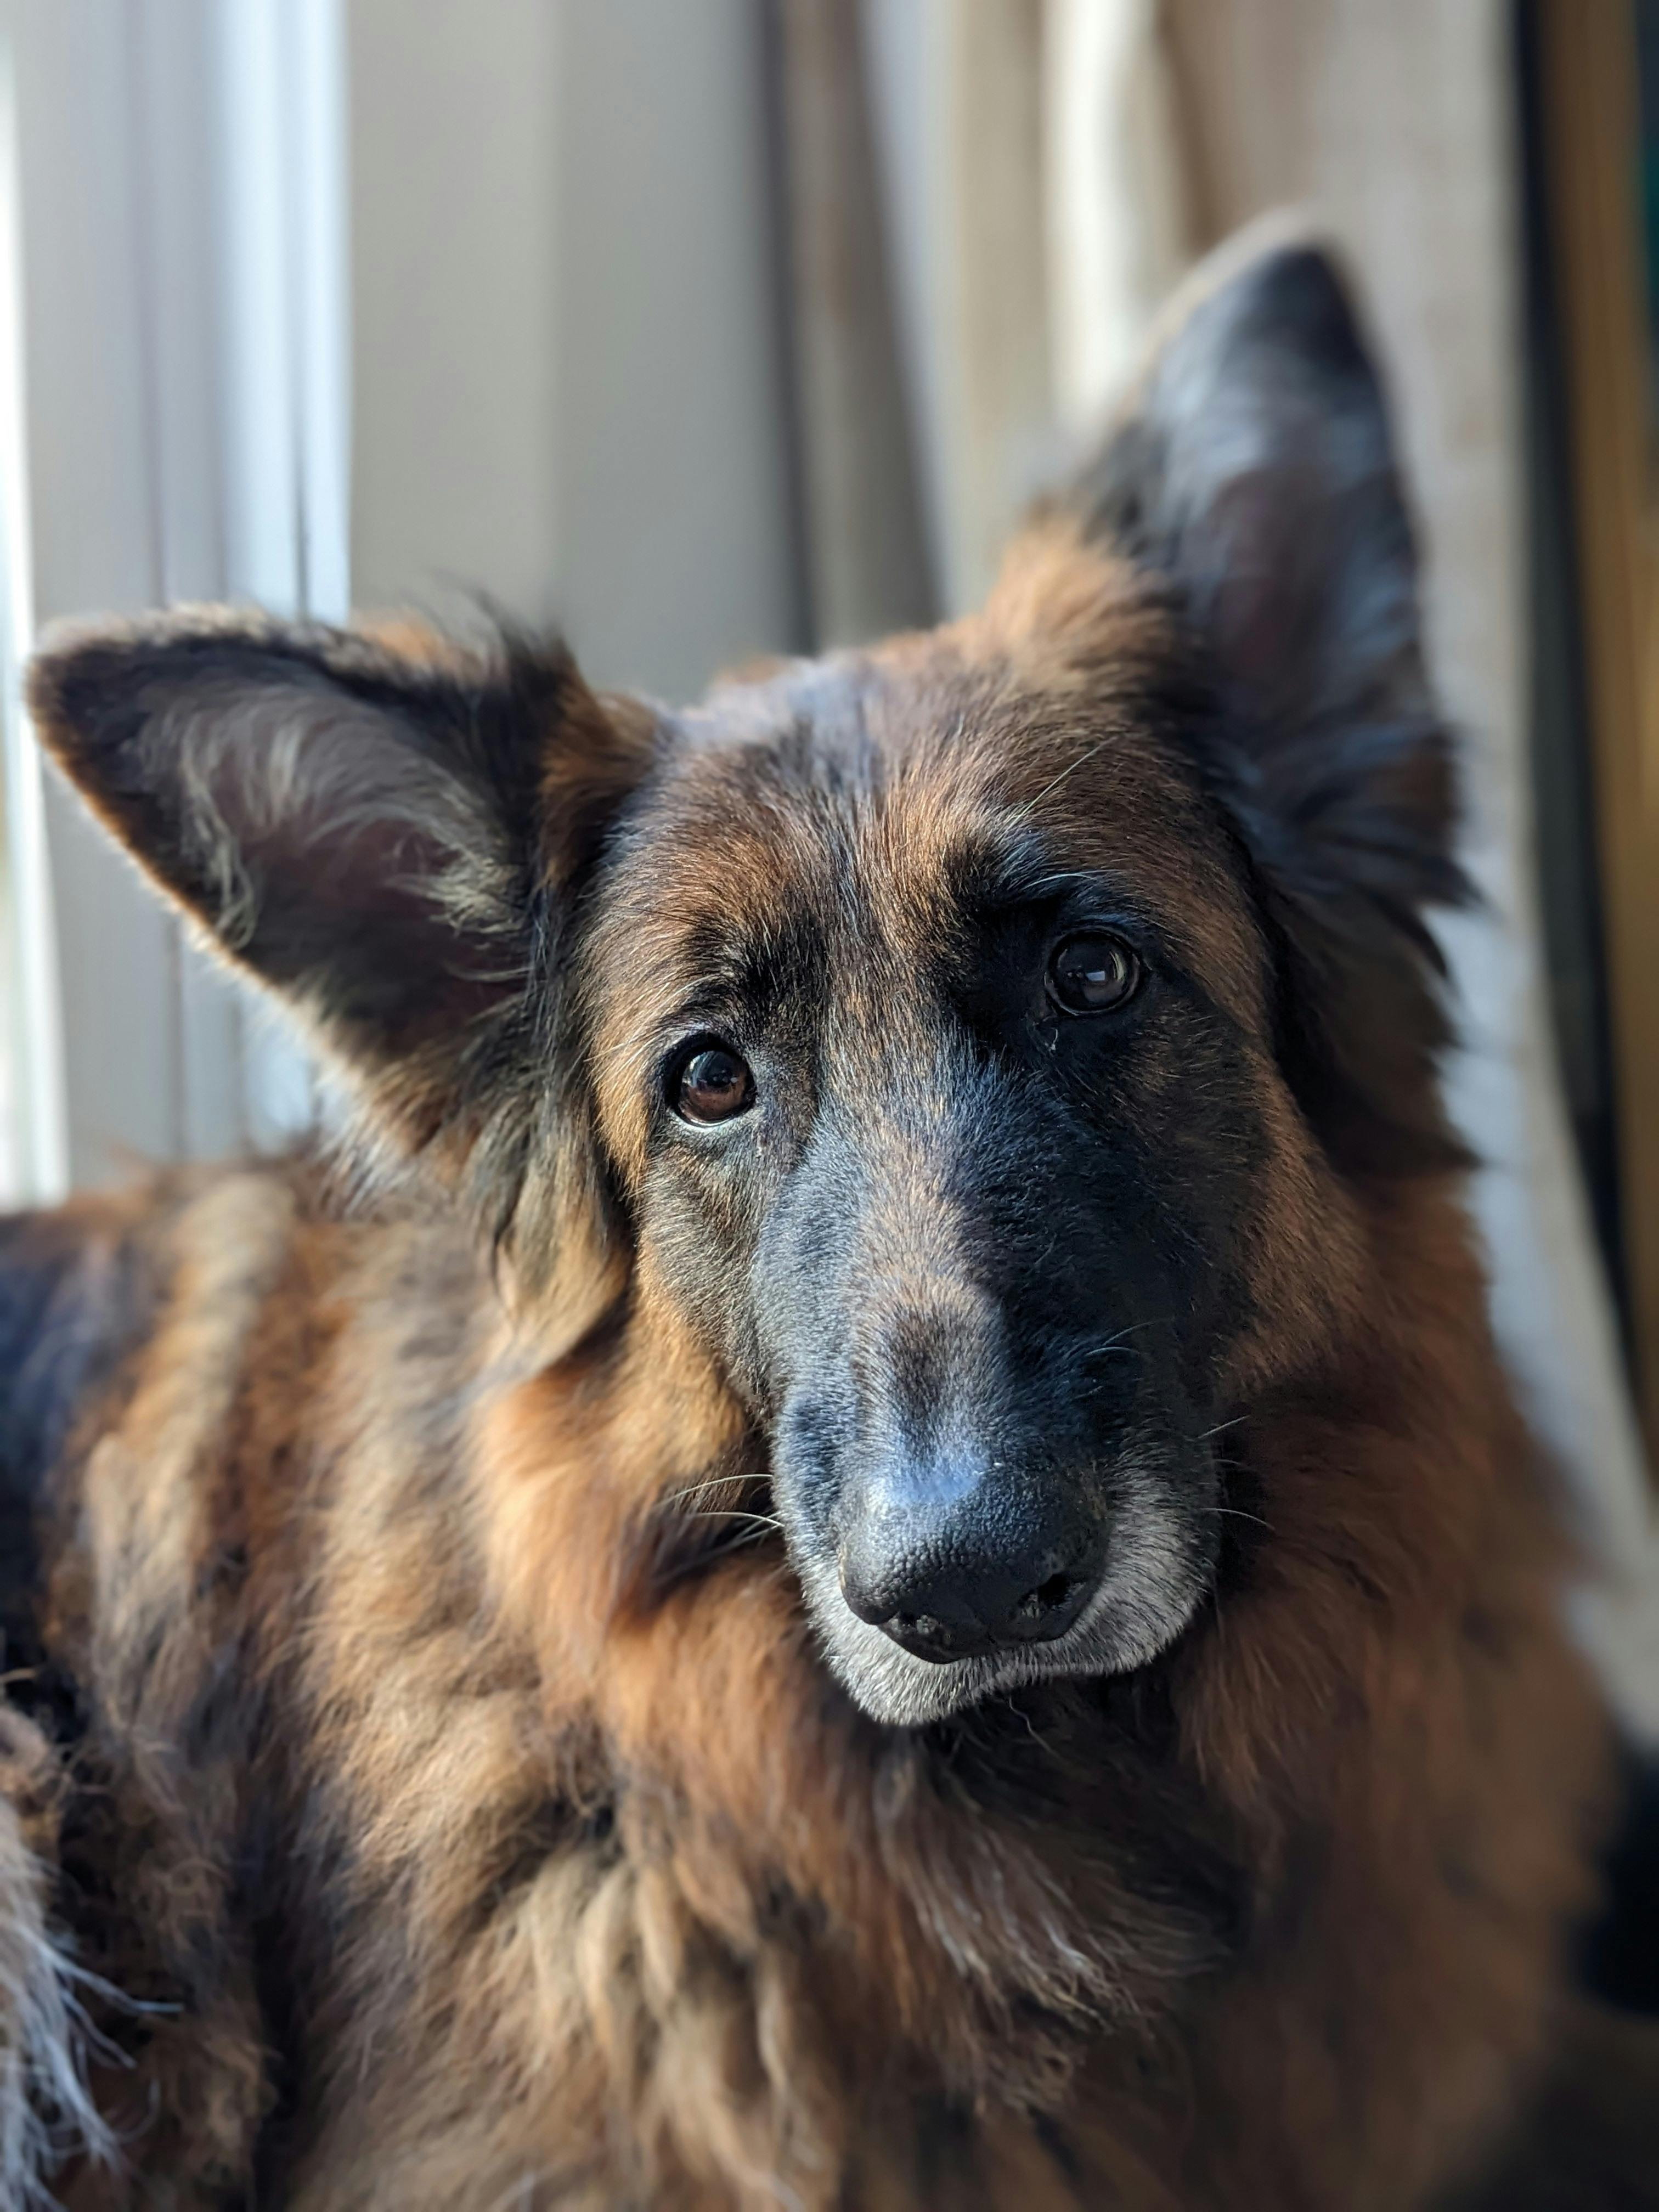 A large, elderly, long-furred black and tan German Shepherd with head cocked looking into the camera.